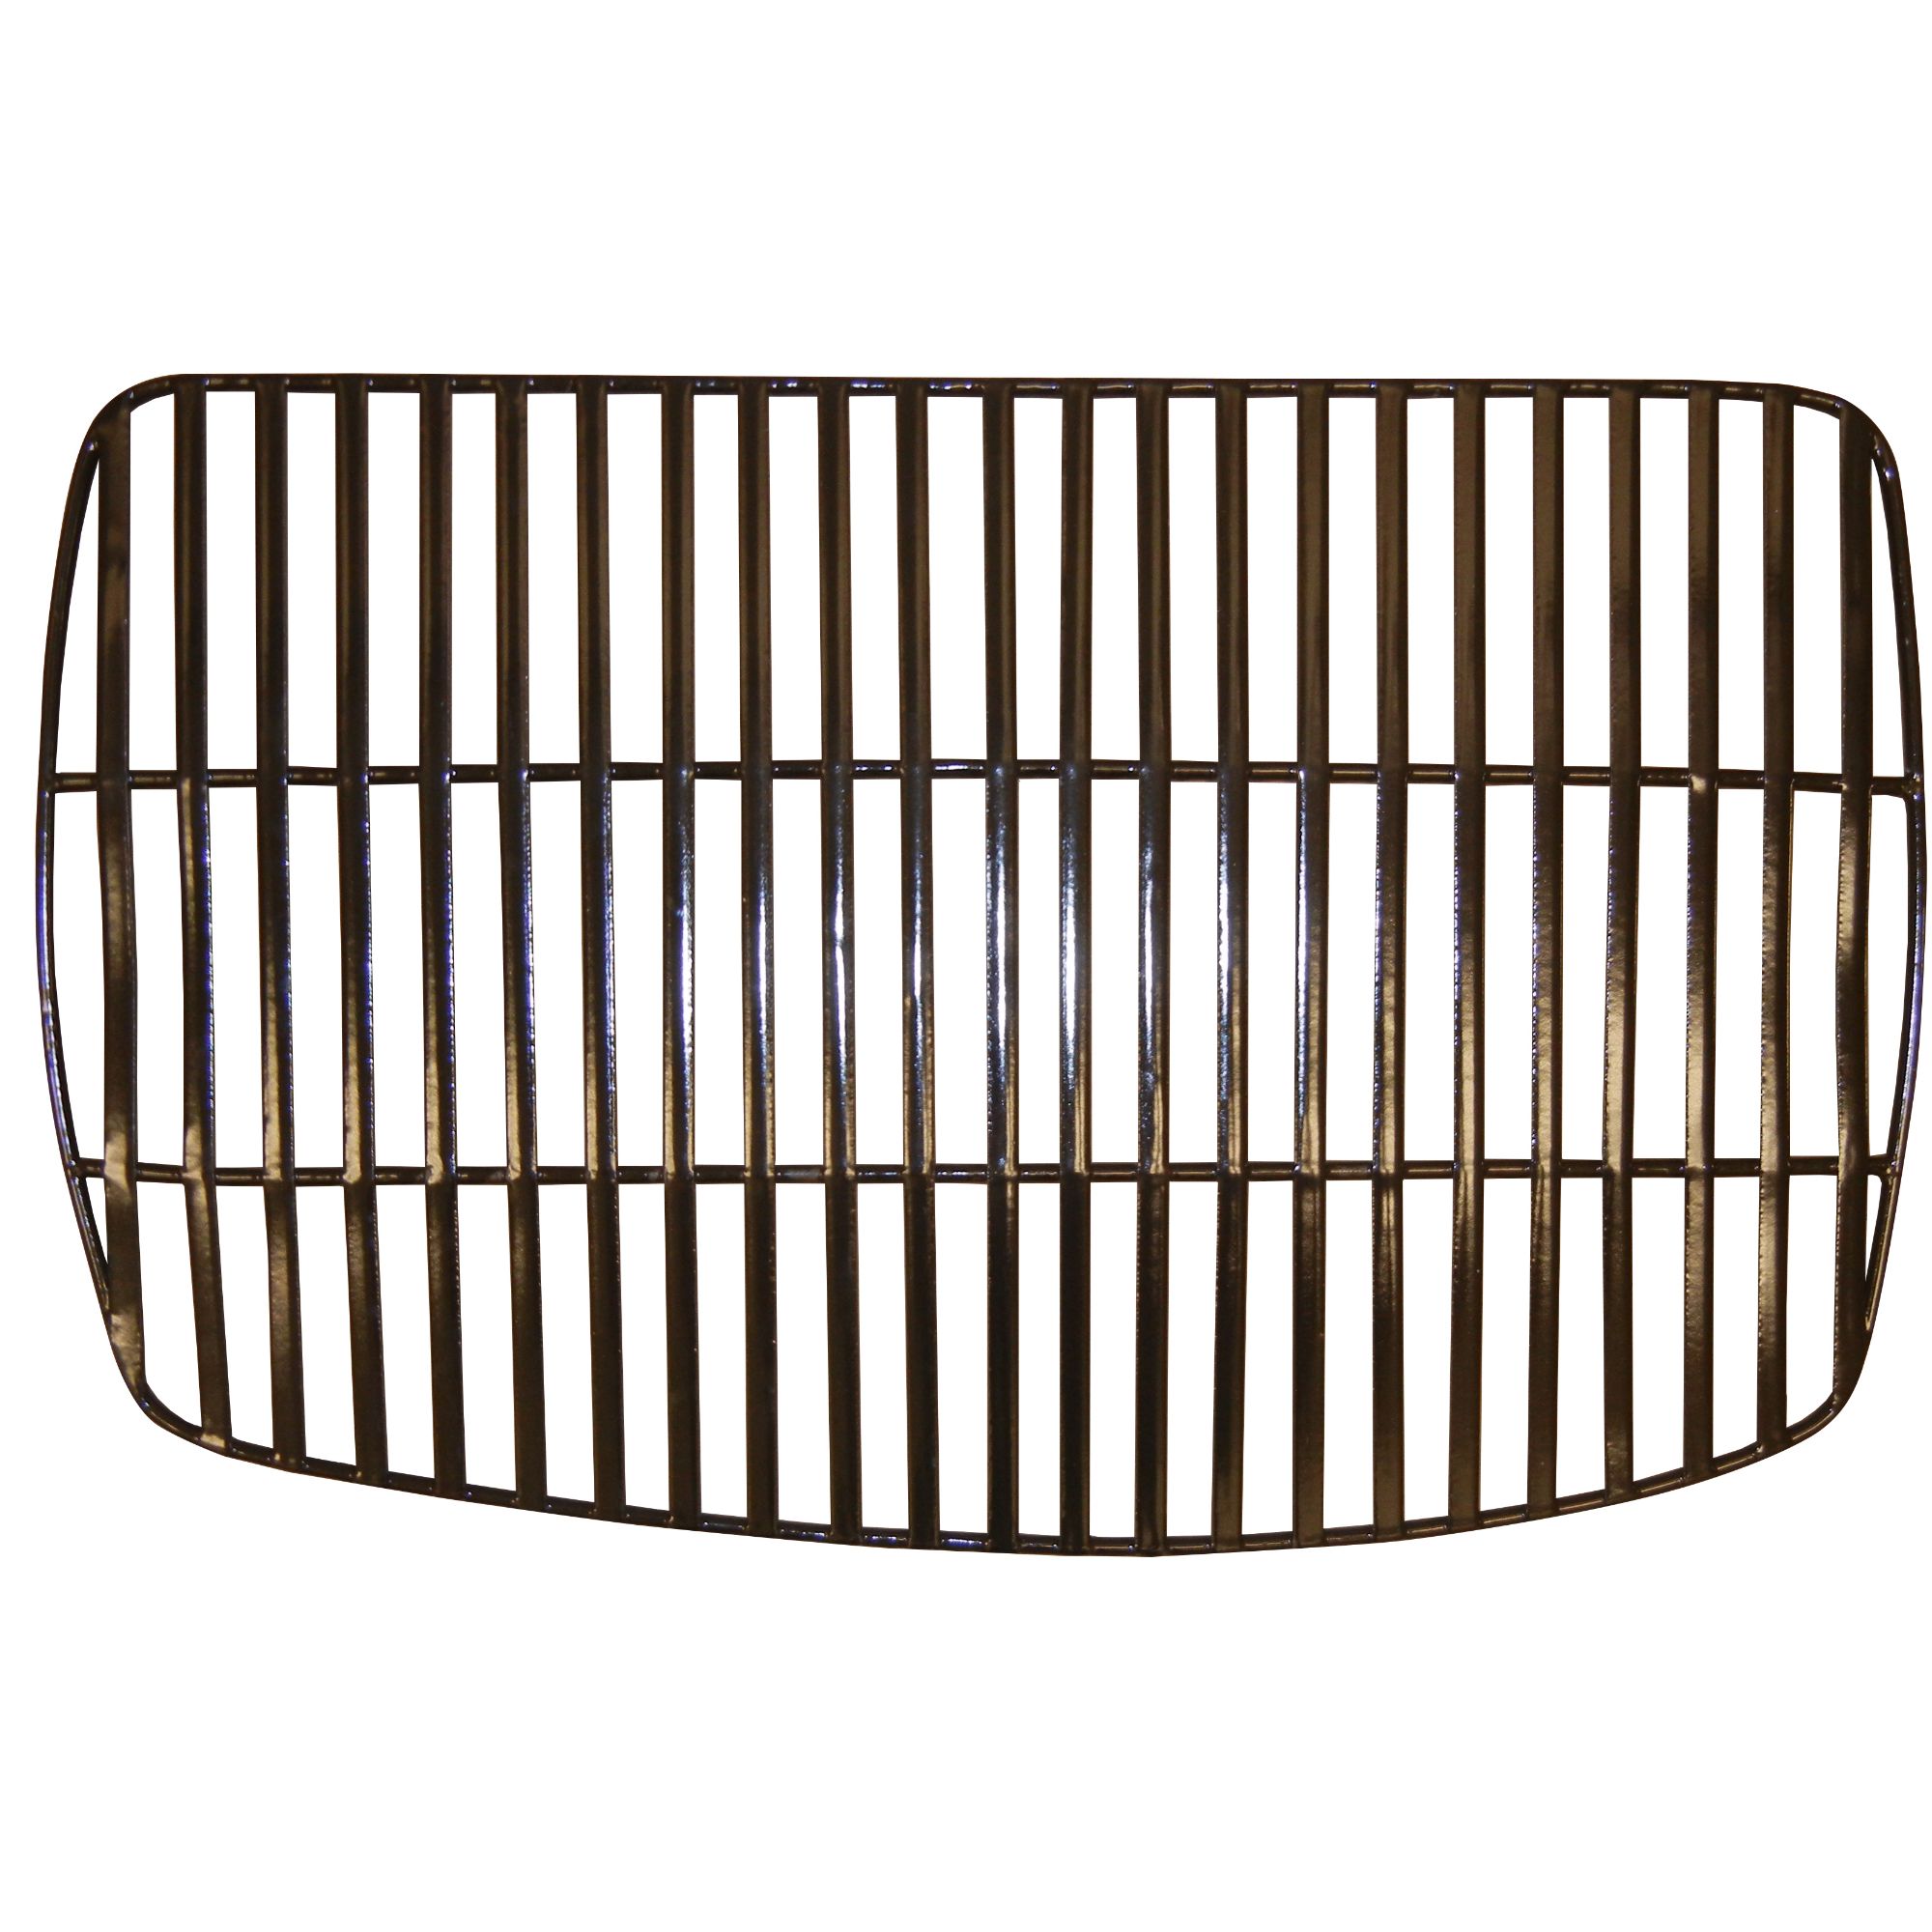 Porcelain steel bar cooking grid for Grill Mate, Uniflame brand gas grills